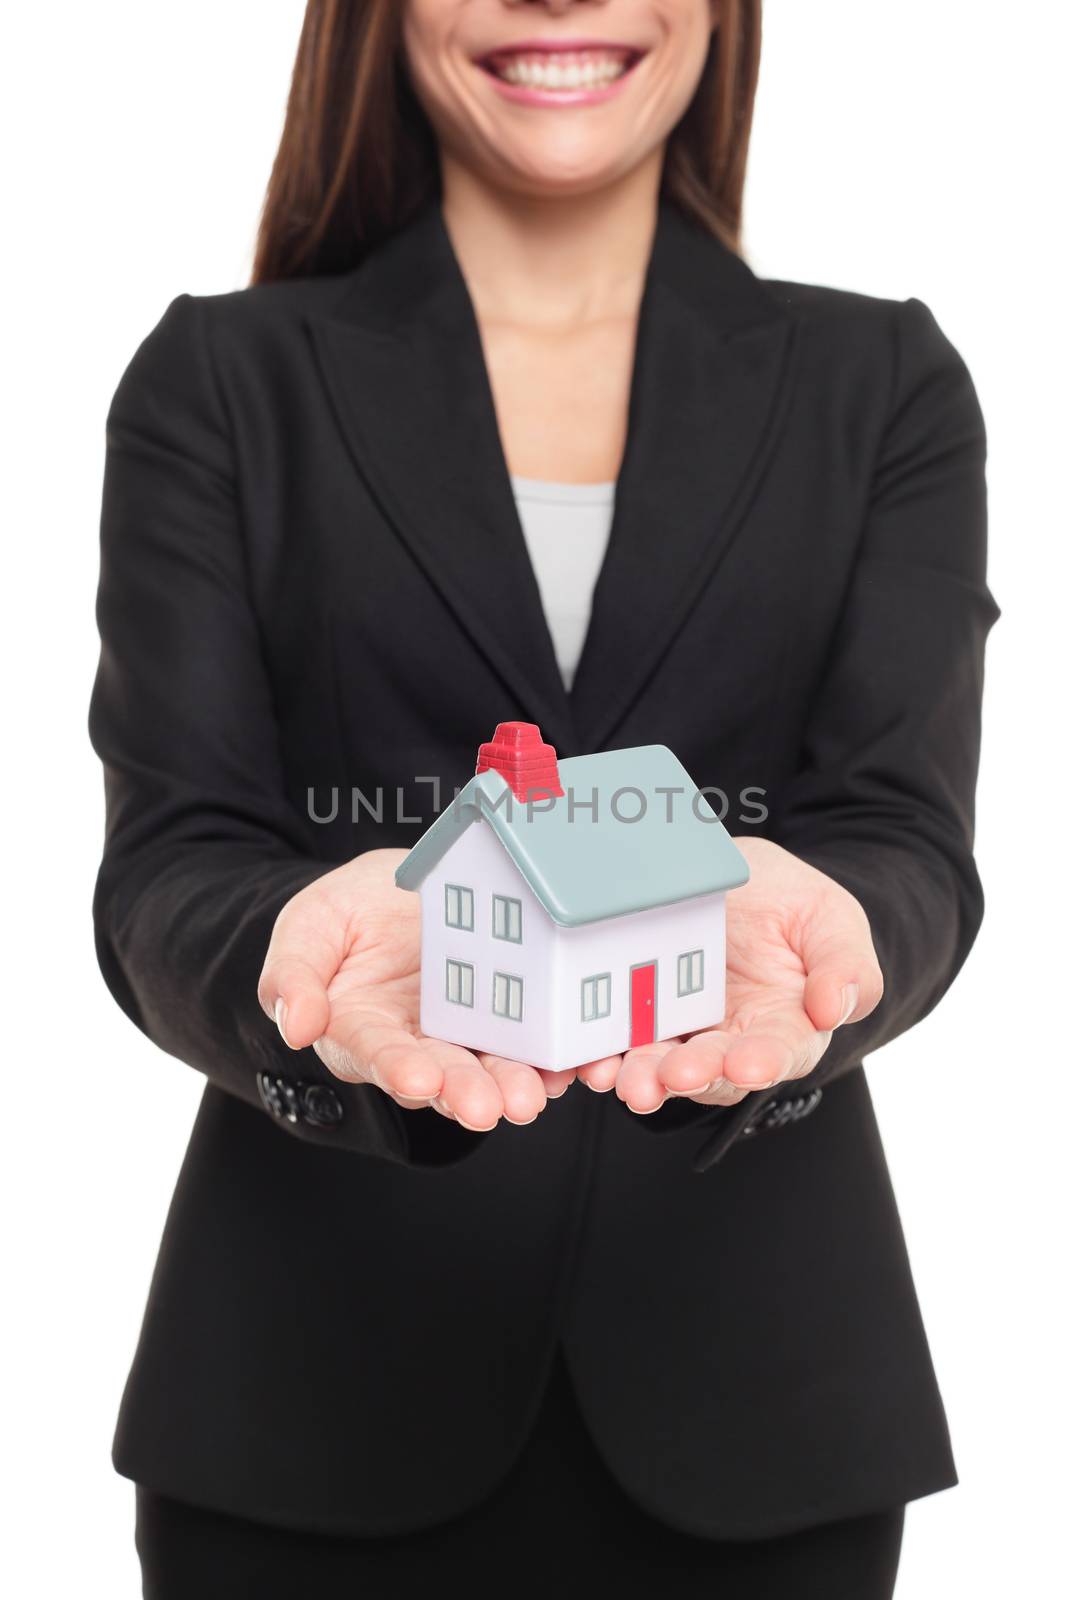 Real estate agent showing new house in mini size. New home owner concept. Realtor showing holding house model. Buying new home conceptual image with business woman in suit isolated on white background